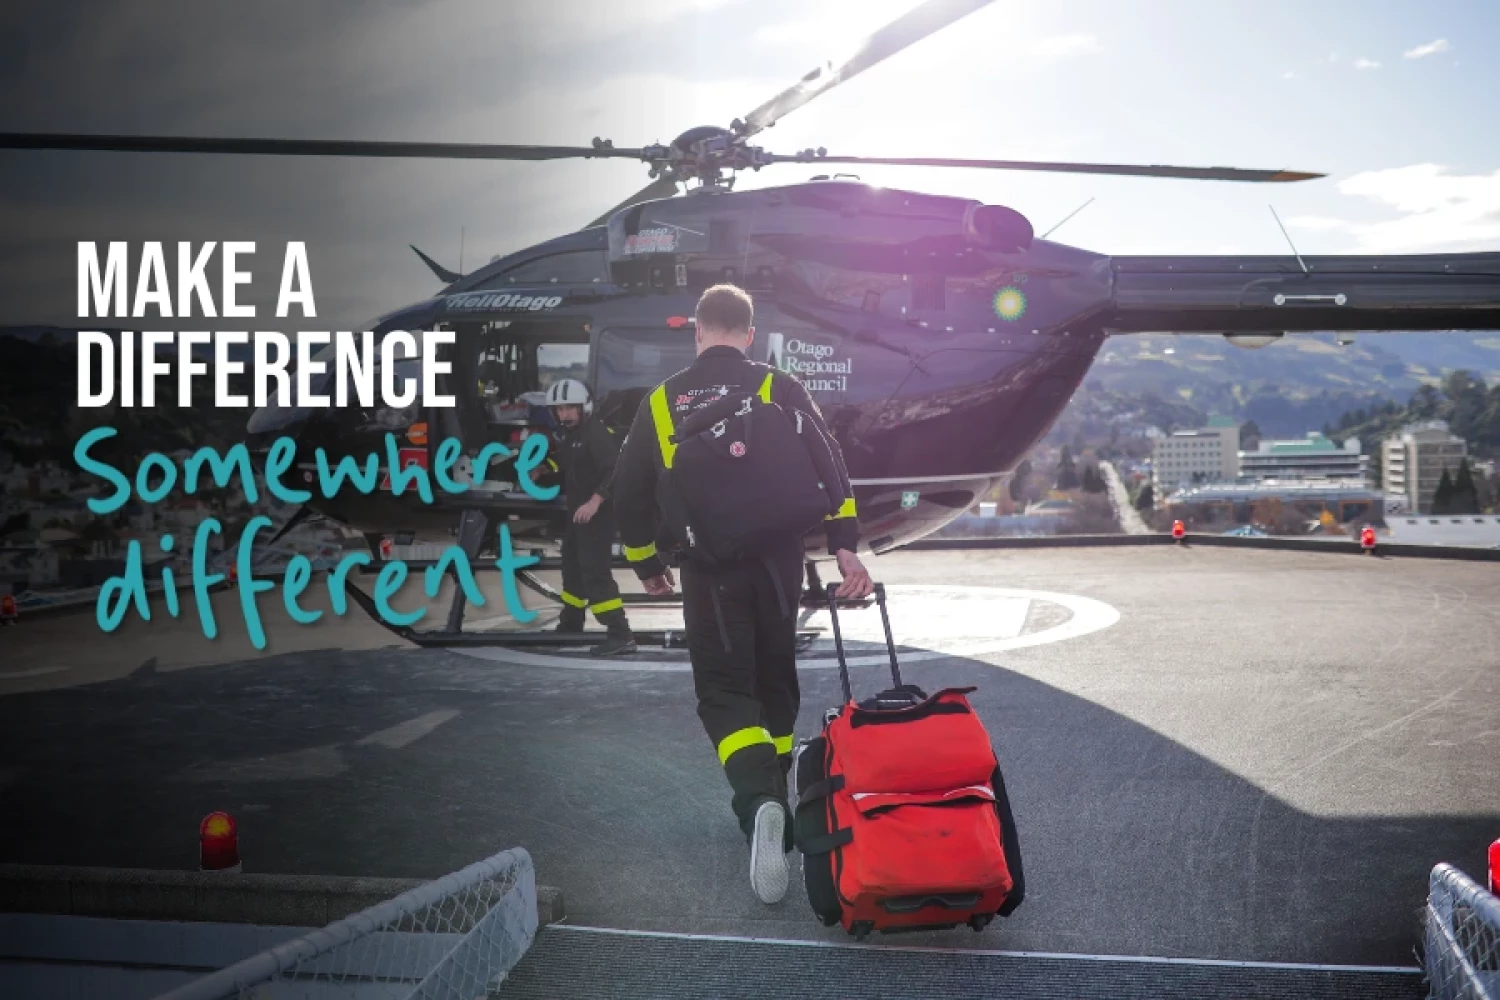 Critical Care make a difference